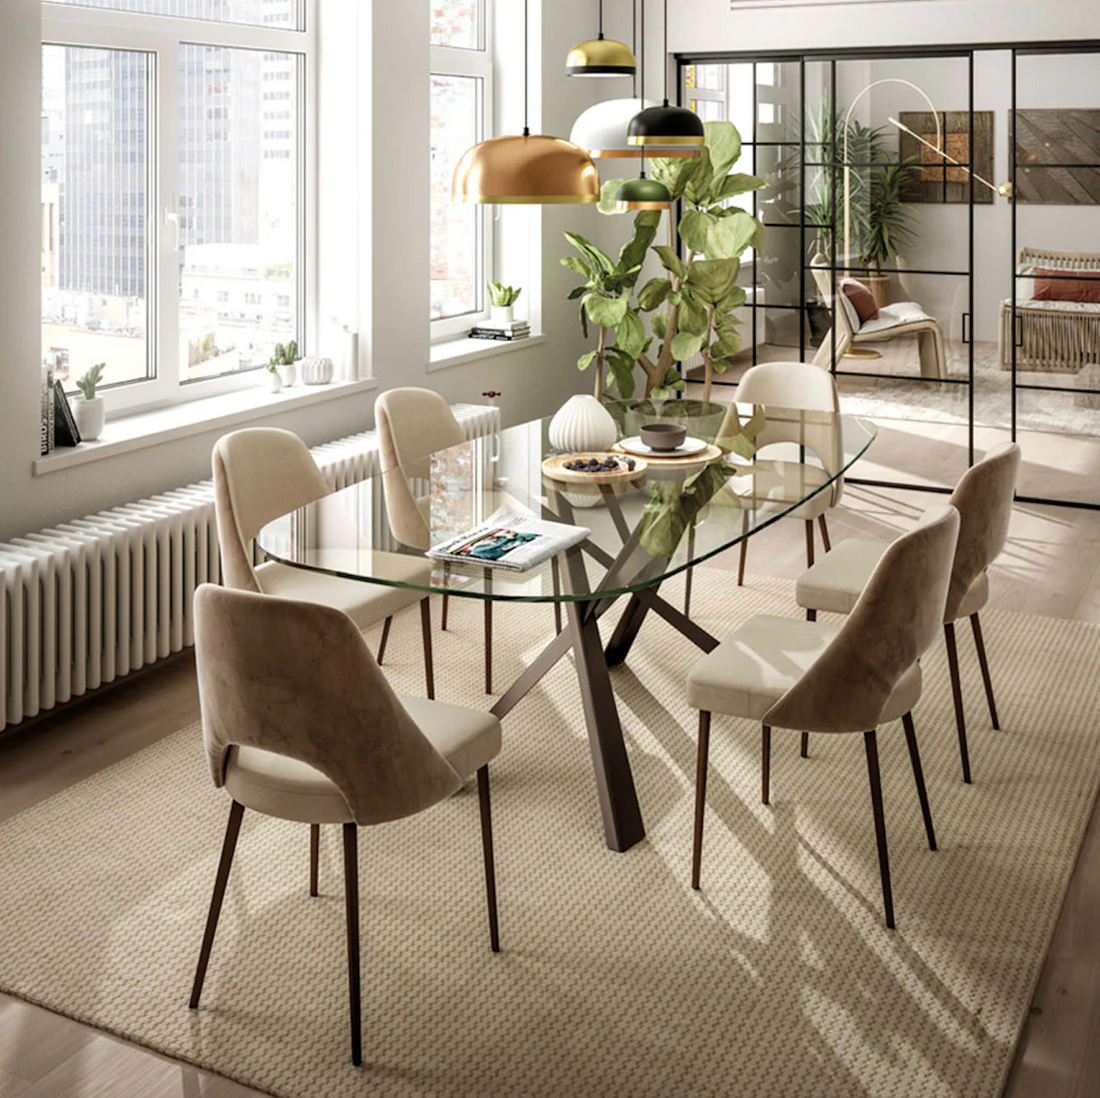 Which Is Better: Glass Or Wood Dining Table